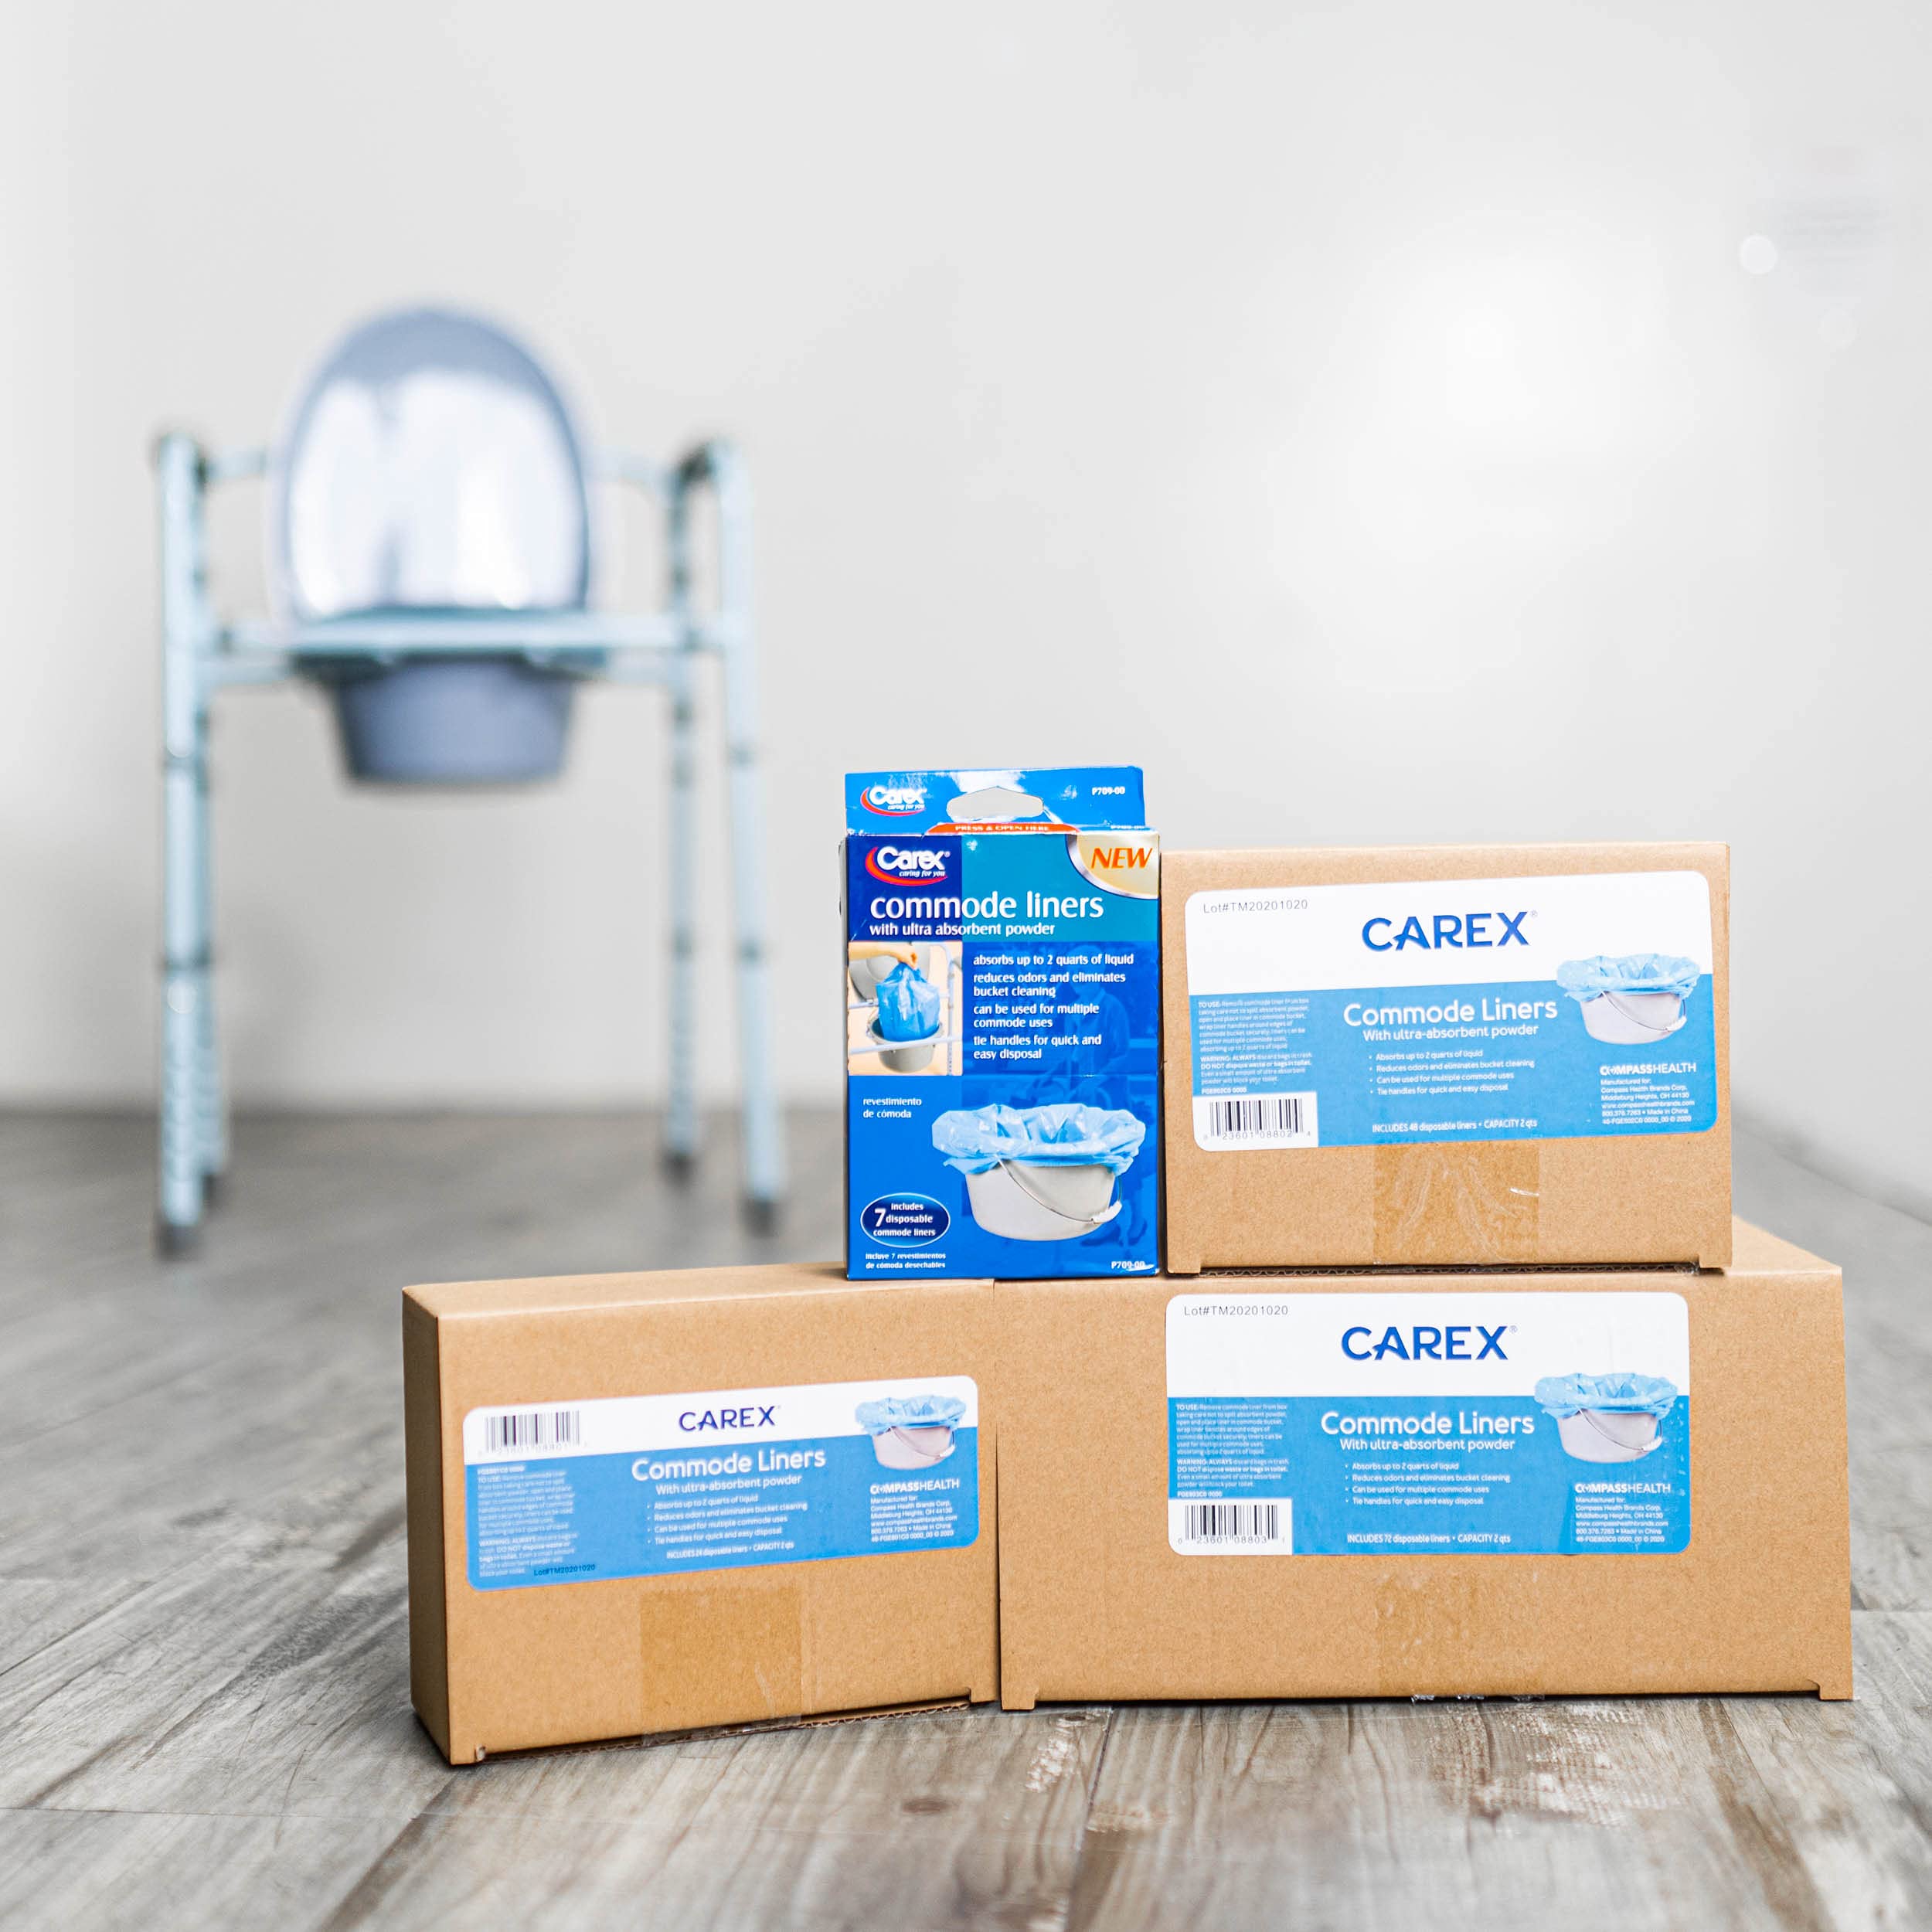 Carex Premium Commode Liners 72 Pack Leak Proof Fits Most Commodes with Absorbent Powder Holds 2 Quarts Liquid Disposable, Commode Liners with Absorbent Pads